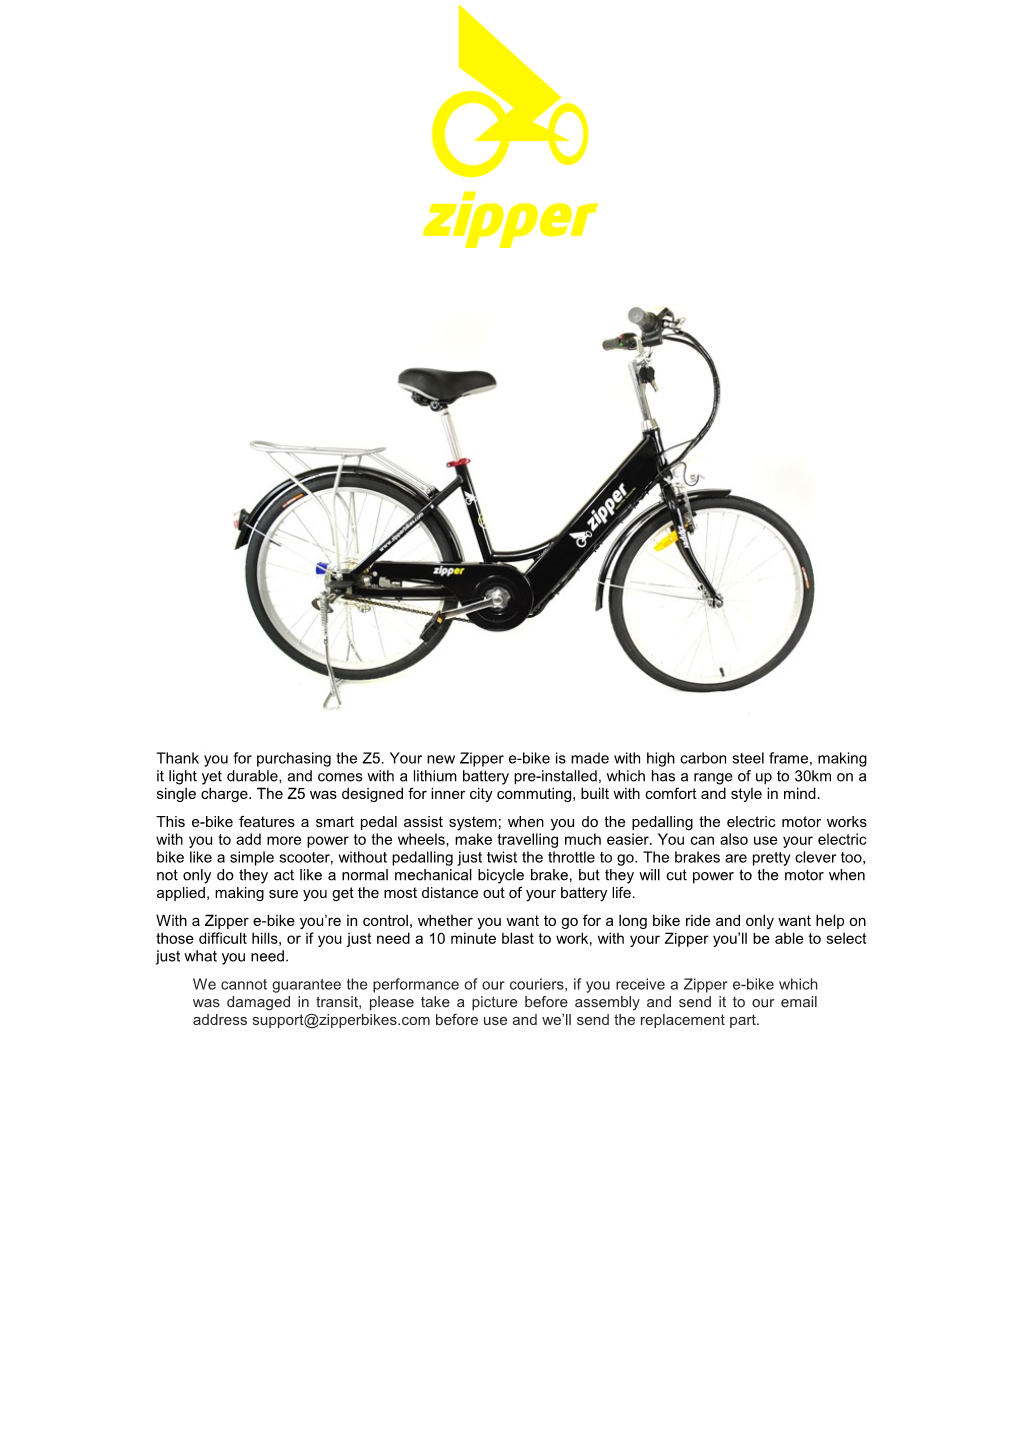 Thank You for Purchasing the Z5. Your New Zipper E-Bike Is Made with High Carbon Steel